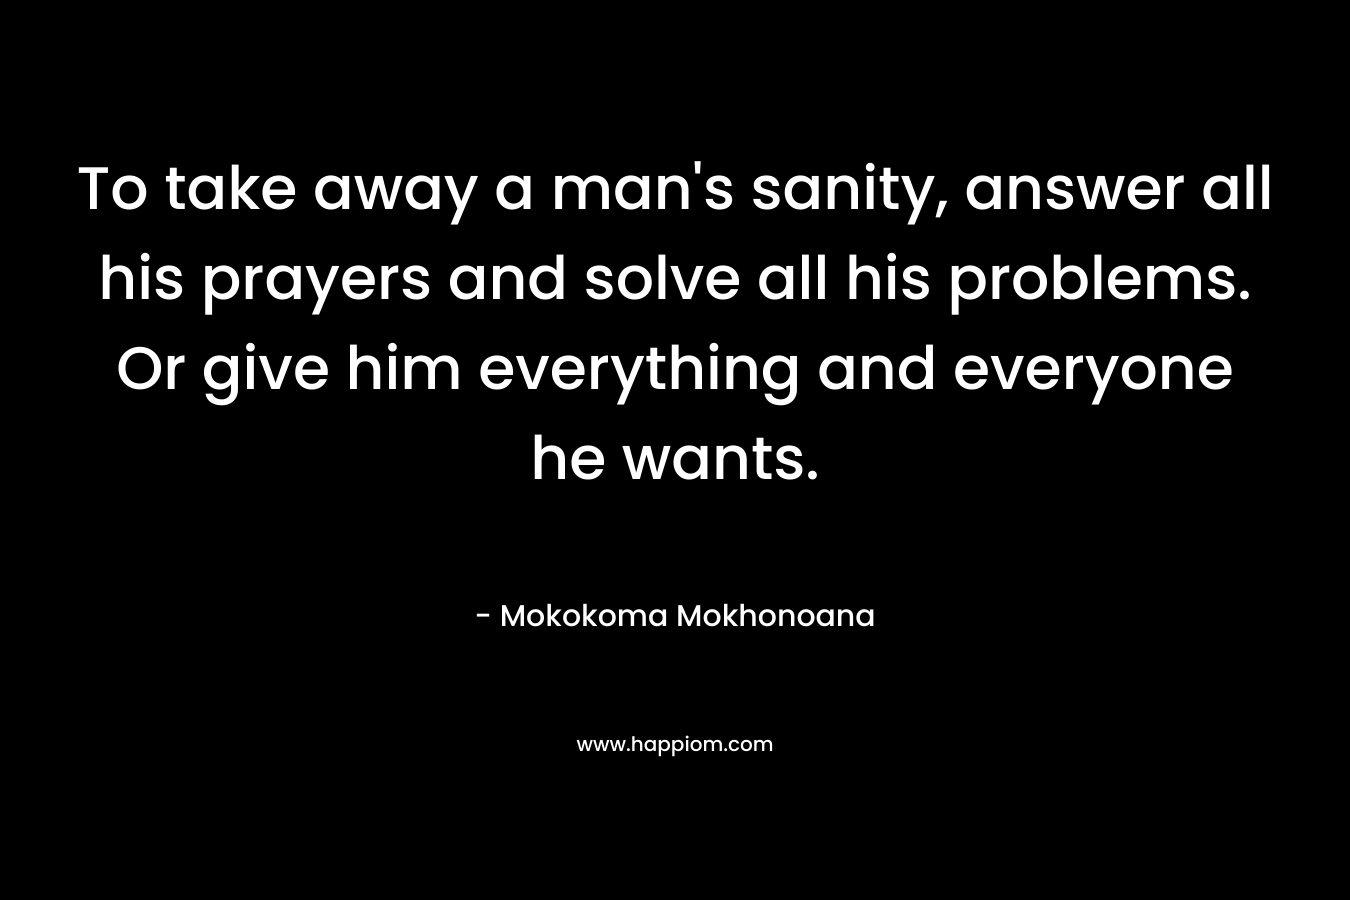 To take away a man's sanity, answer all his prayers and solve all his problems. Or give him everything and everyone he wants.